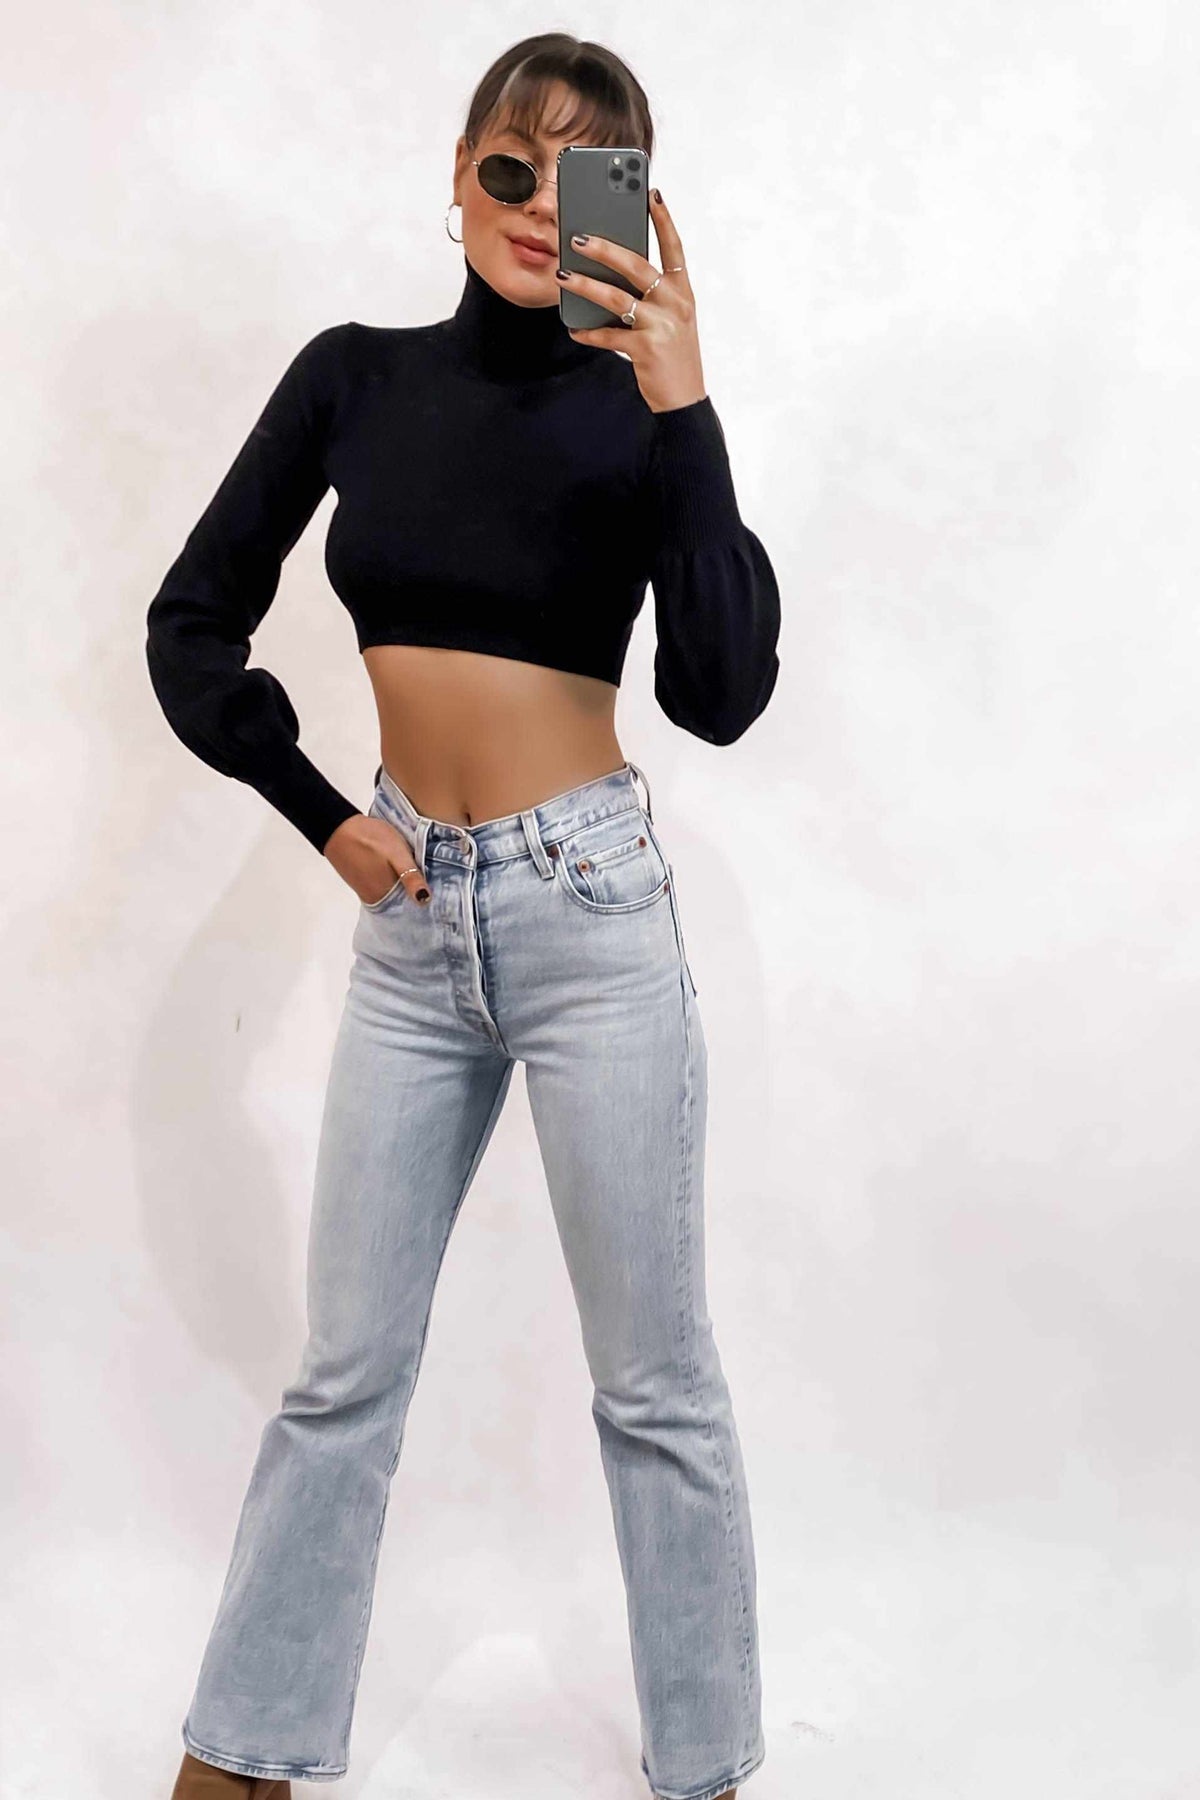 Harlem Top, BASICS, BLACK, CROP TOP, CROP TOPS, Sale, TOPS, Our New Harlem Top Is Now Only $50.00 Exclusive At Mishkah, Our New Harlem Top is now only $50.00-We Have The Latest Women&#39;s Tops @ Mishkah Online Fashion Boutique-MISHKAH